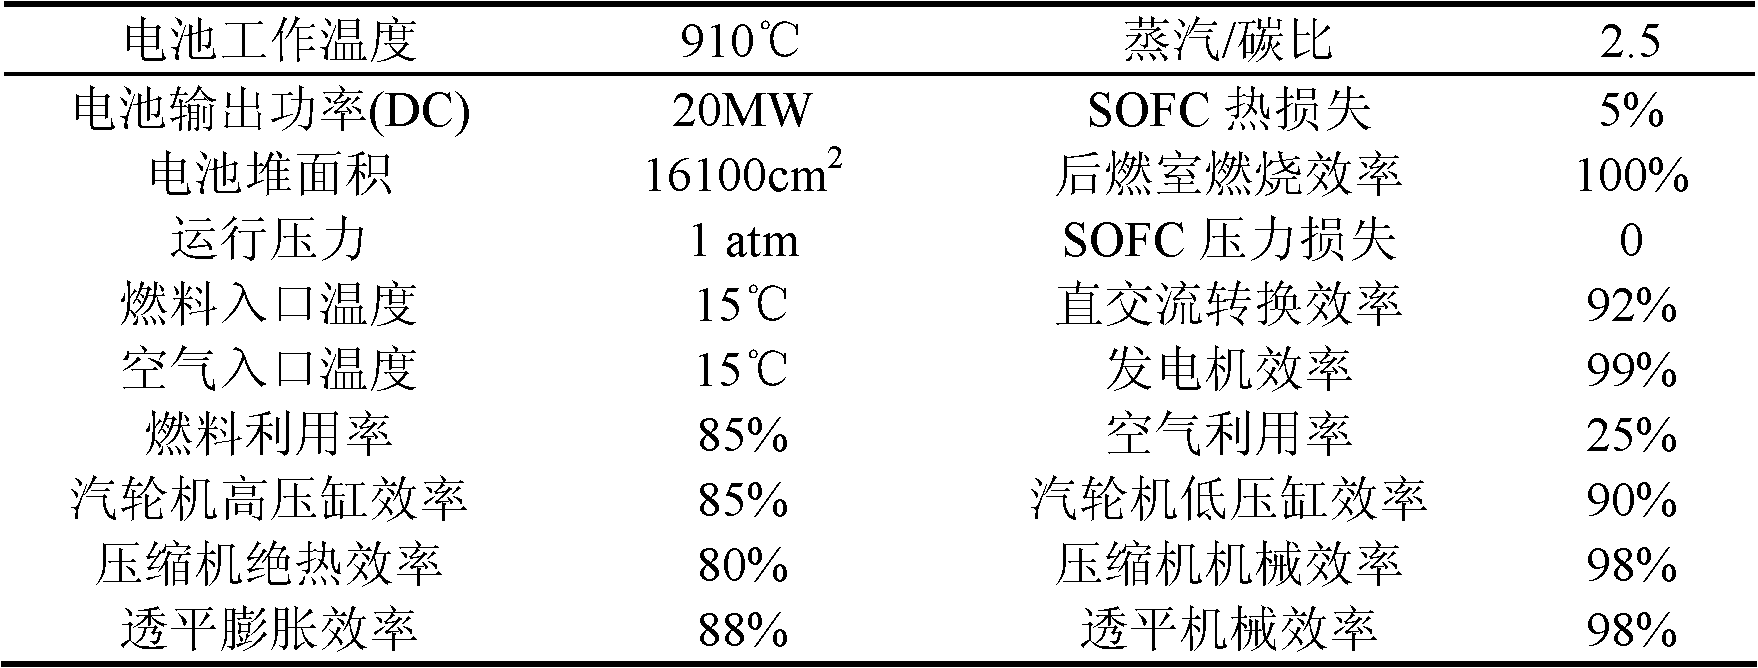 OTM (oxygen transport membrane)-integrated SOFC (solid oxide fuel cell)/AT (air turbine)/ST (steam turbine) composite power system with zero CO2 (carbon dioxide) emission